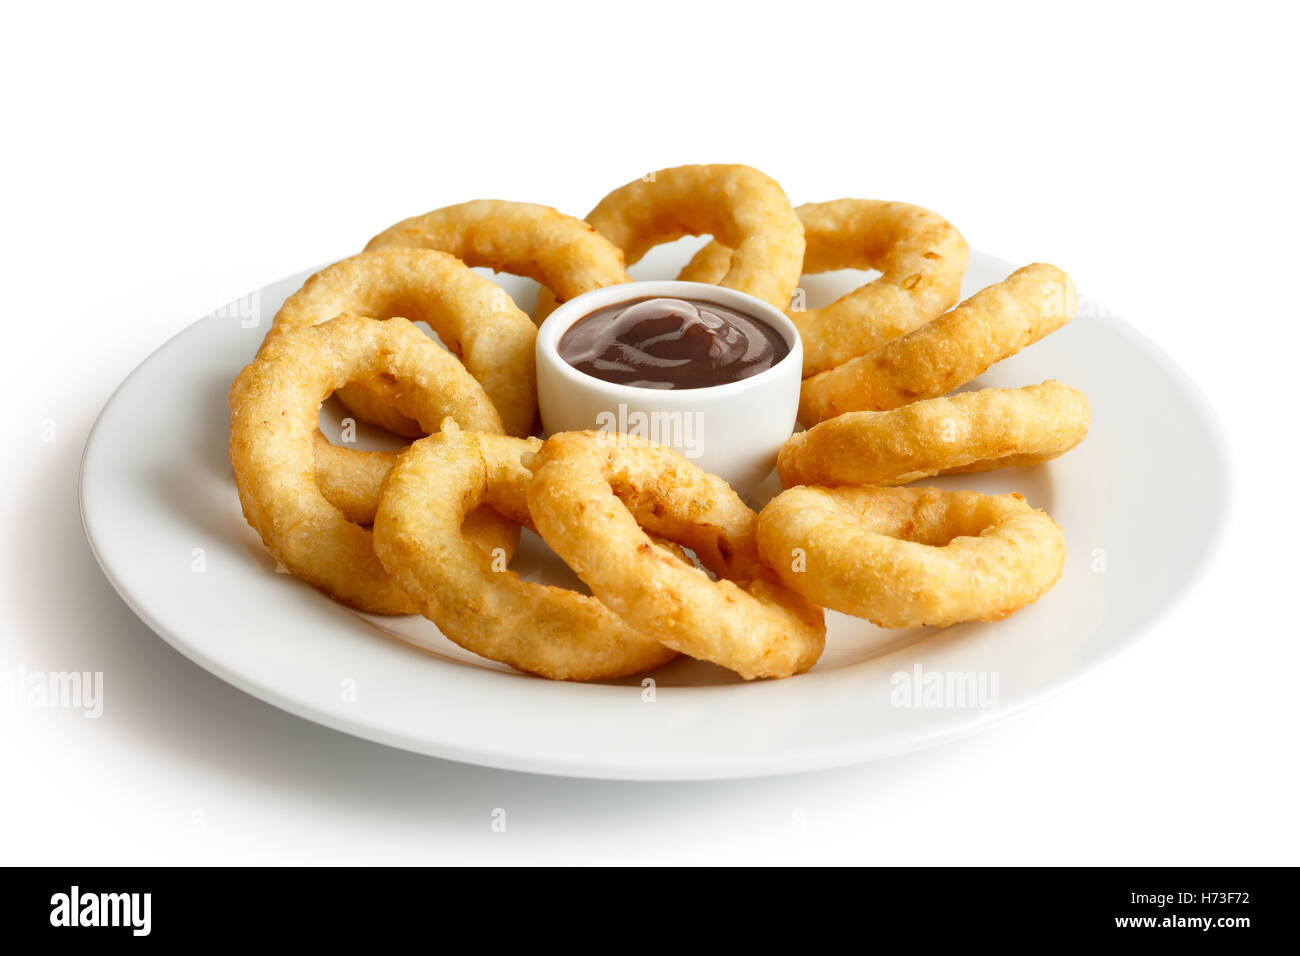 Heap of deep fried onion or calamari rings with barbecue dip on white plate. Stock Photo